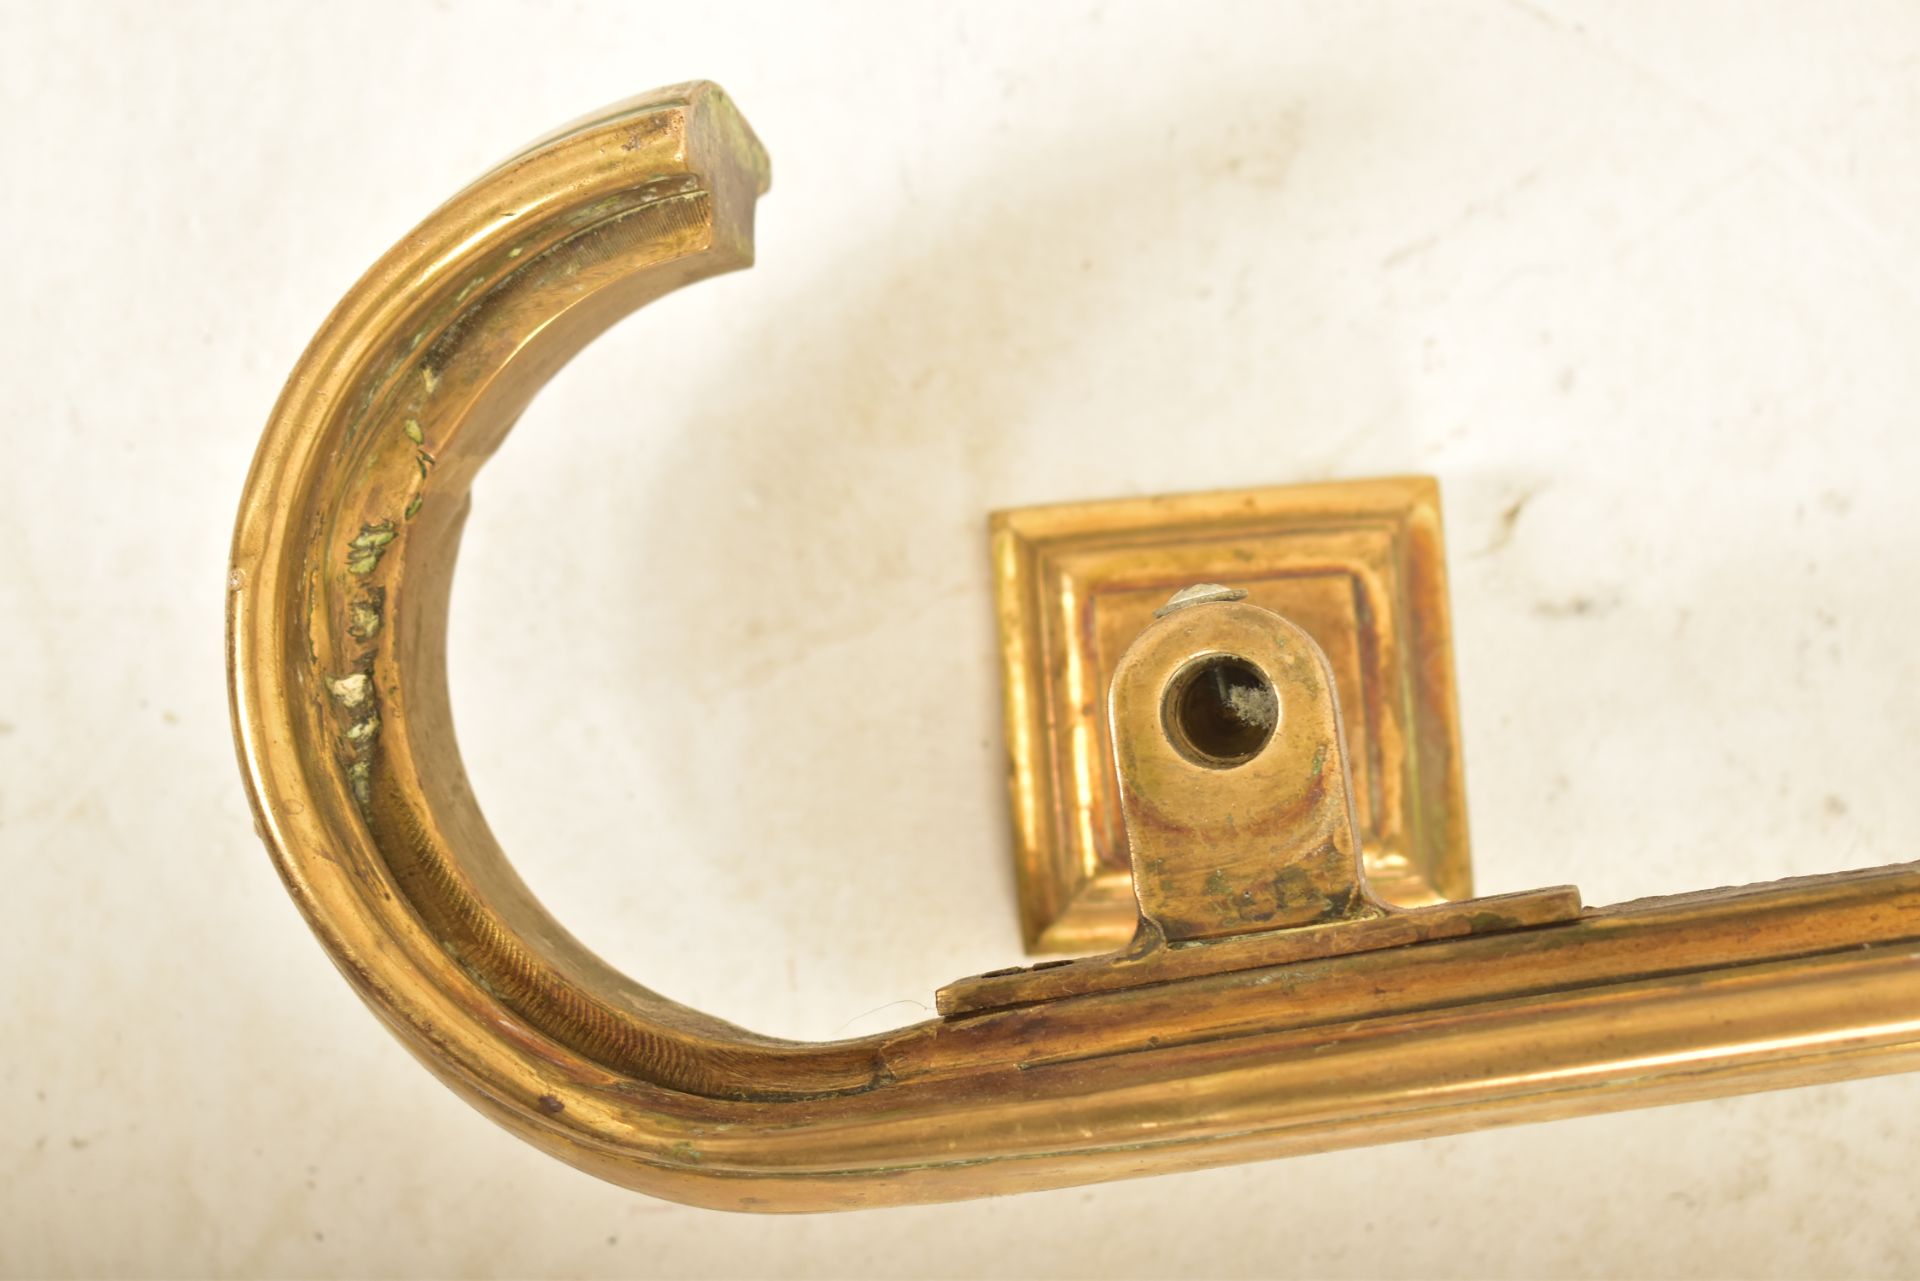 PAIR OF EARLY 20TH CENTURY BRASS THEATRE HANDRAILS - Image 4 of 6